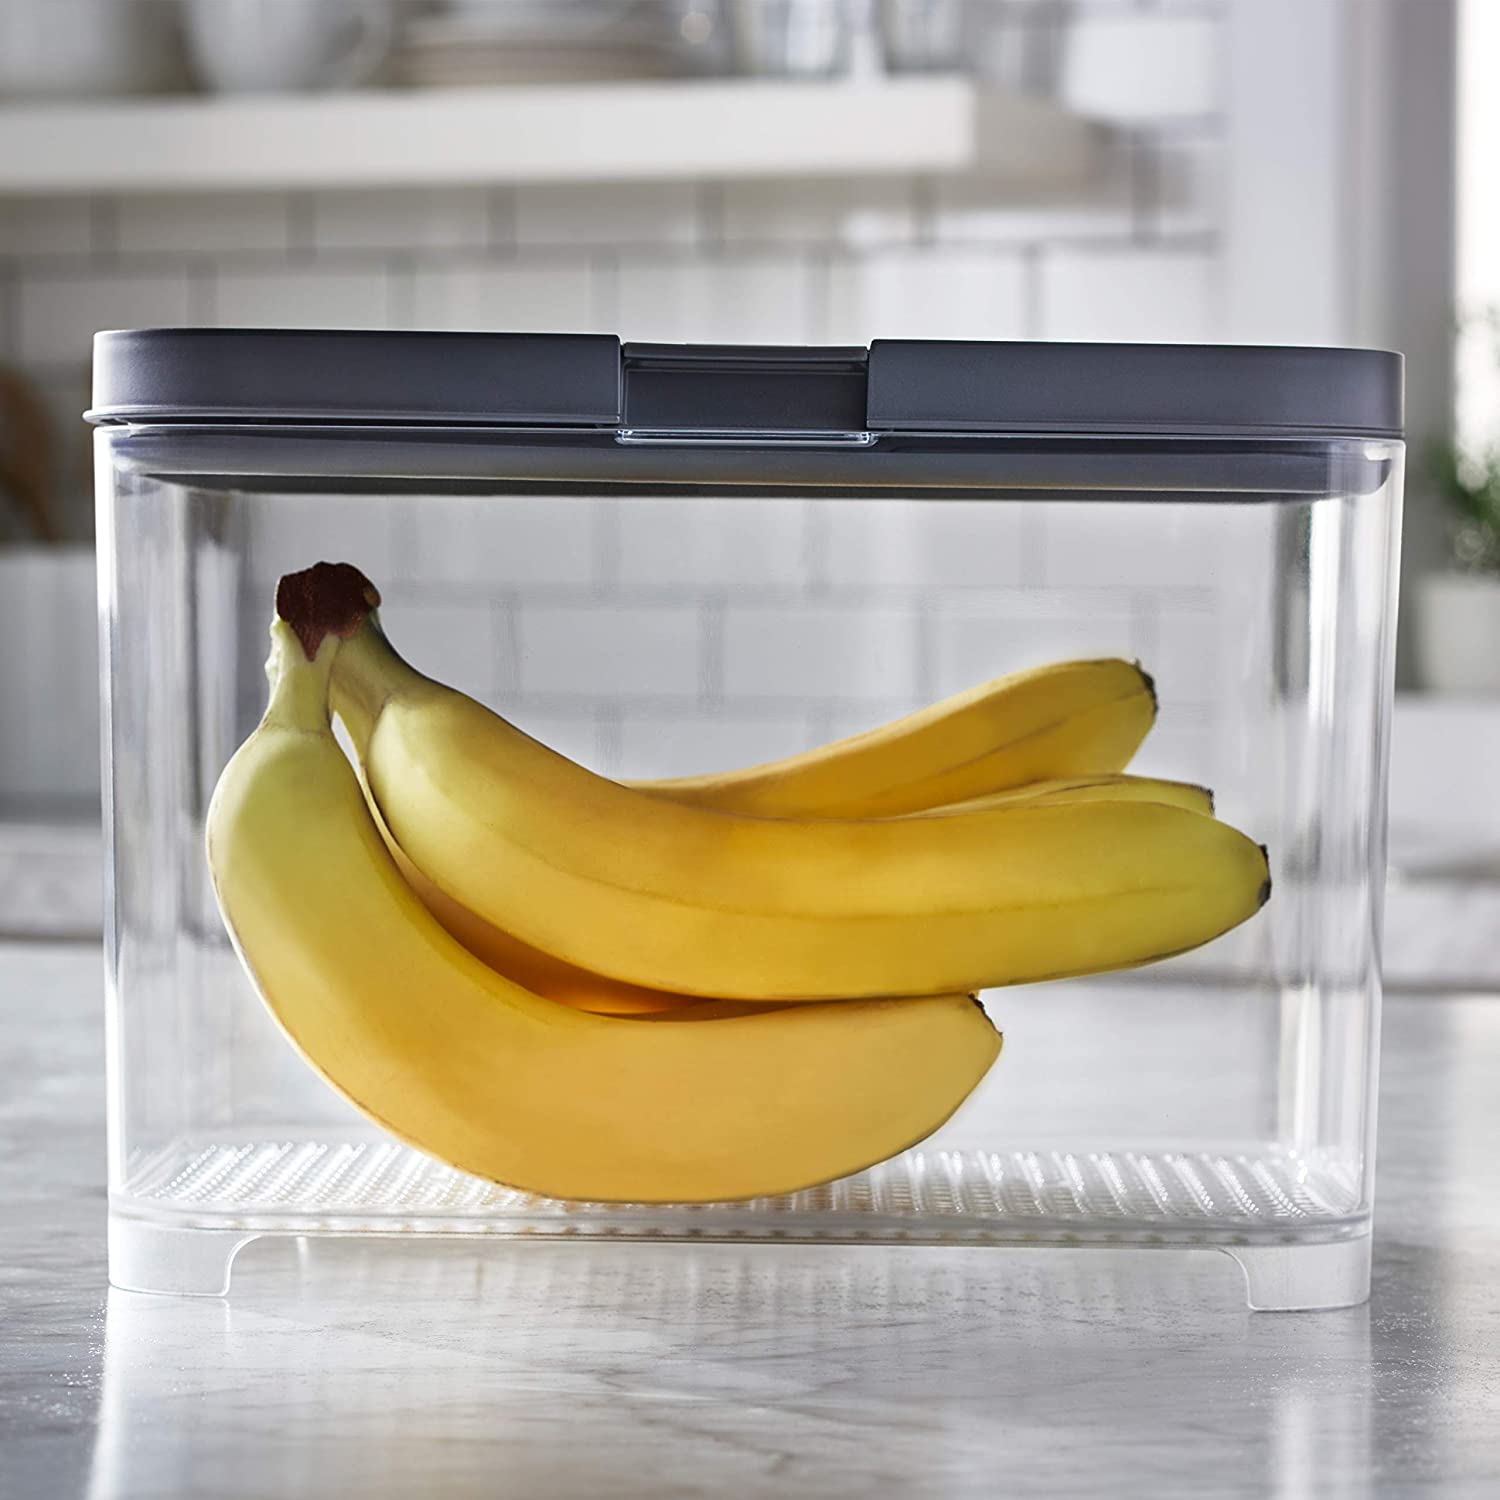 Rubbermaid FreshWorks Countertop Banana Countertop Food Storage Container, 7.3 L - Whole and All